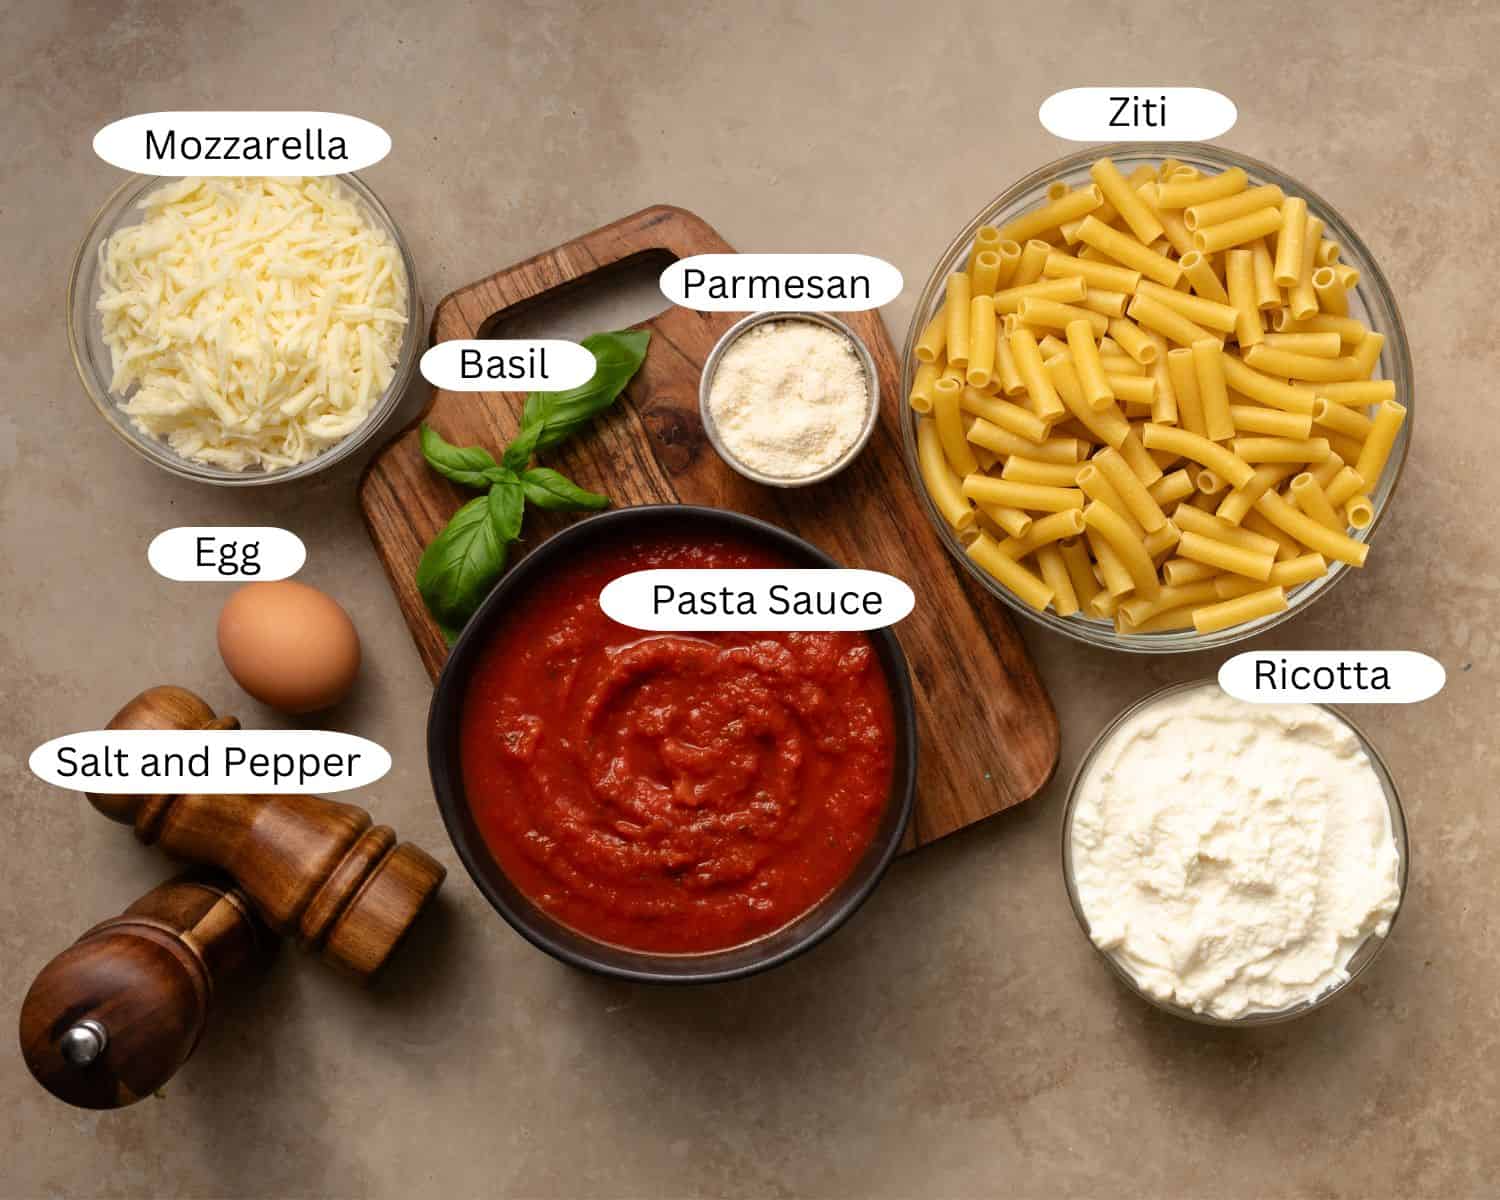 Ingredients for baked ziti.